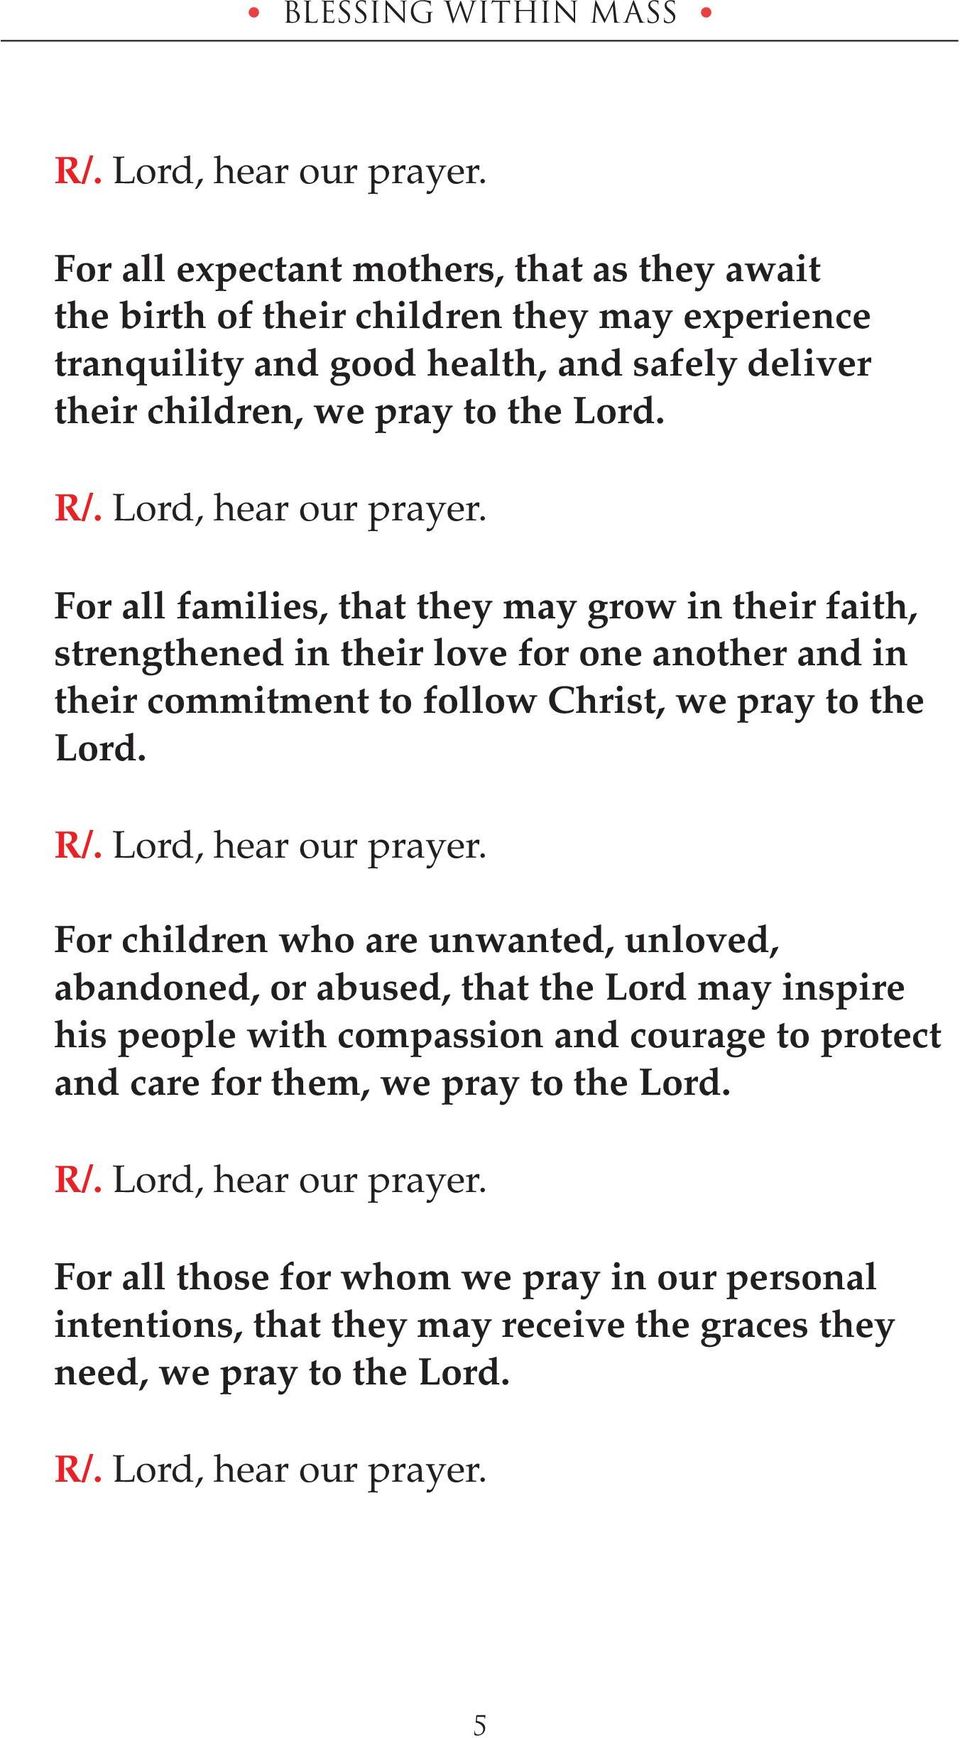 Lord, hear our prayer. For all families, that they may grow in their faith, strengthened in their love for one another and in their commitment to follow Christ, we pray to the Lord. R/.